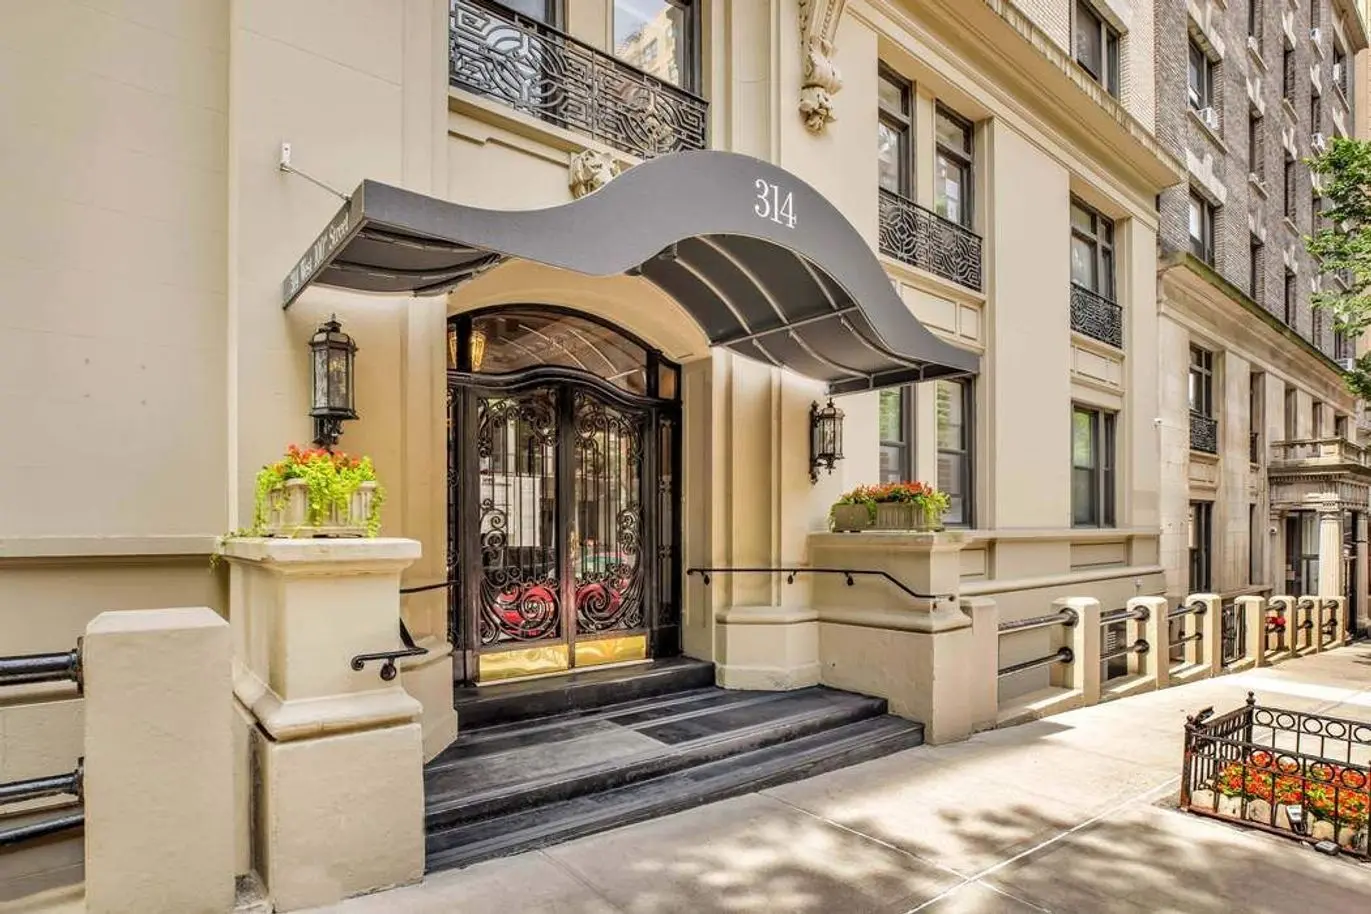 The Chateaux, 314 West 100th Street